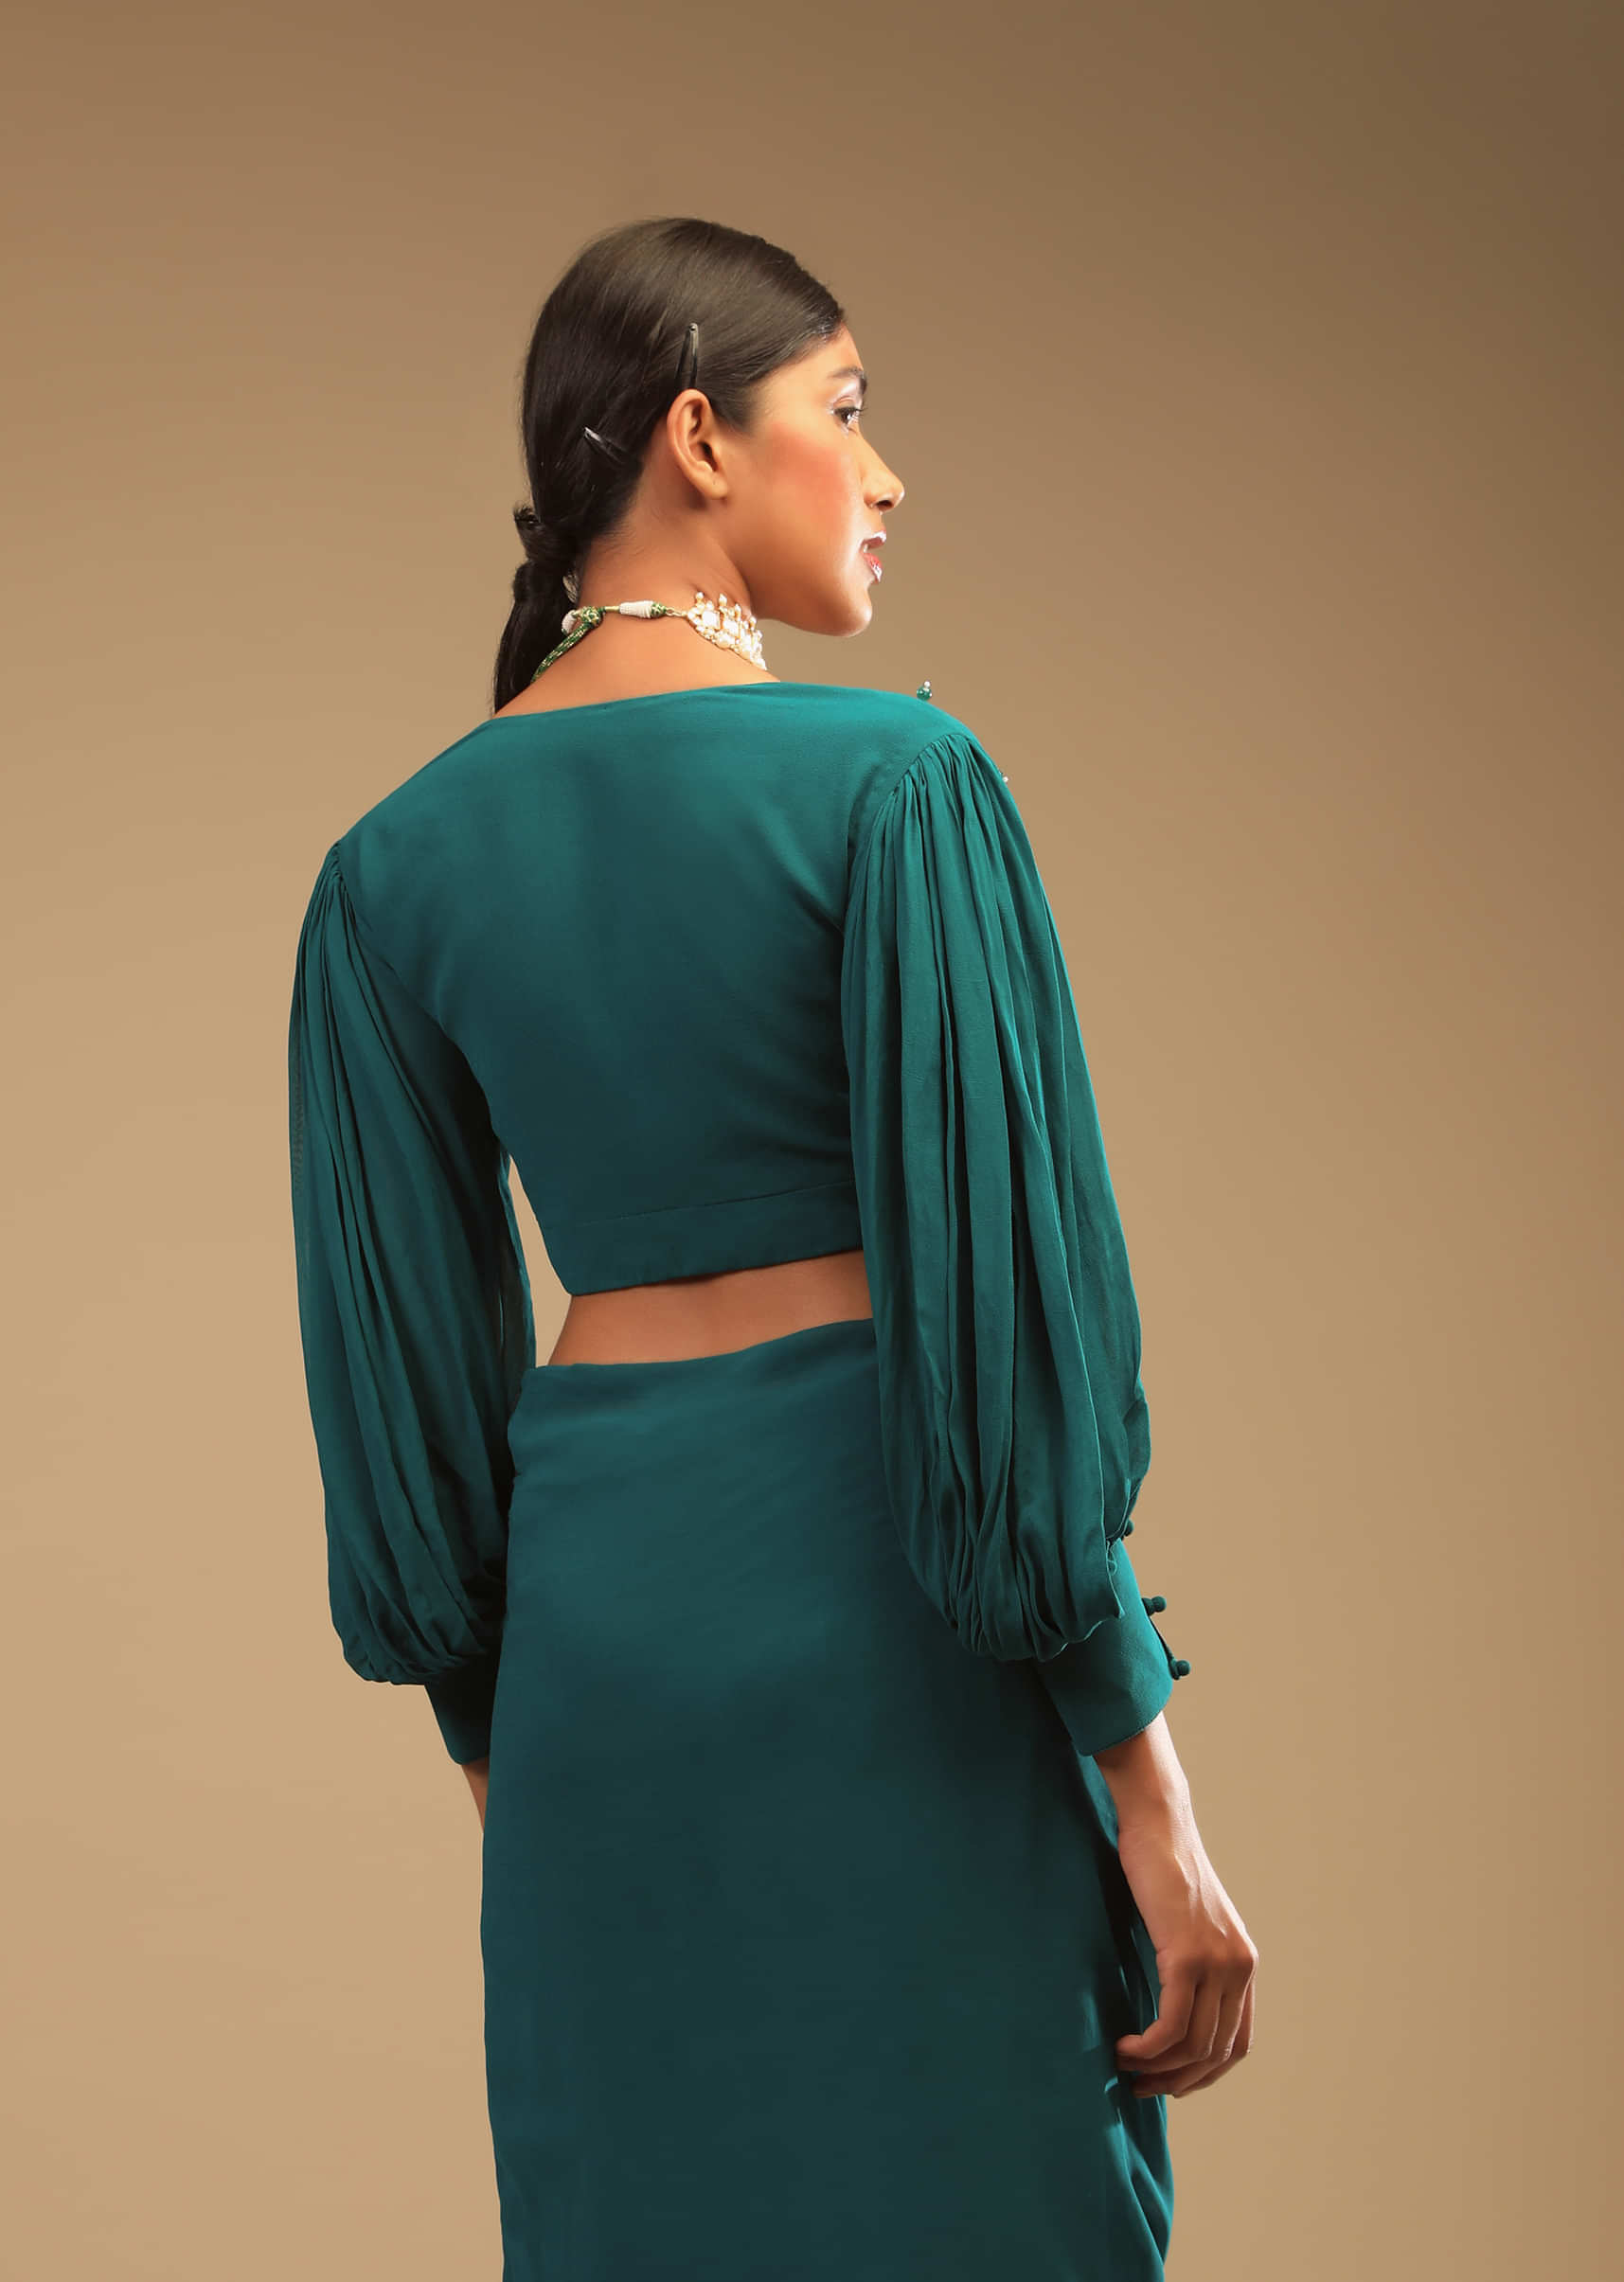 Teal Blue Ready-To-Wear Saree In Georgette With Ruffle Frill And A Chunky Embroidered Belt